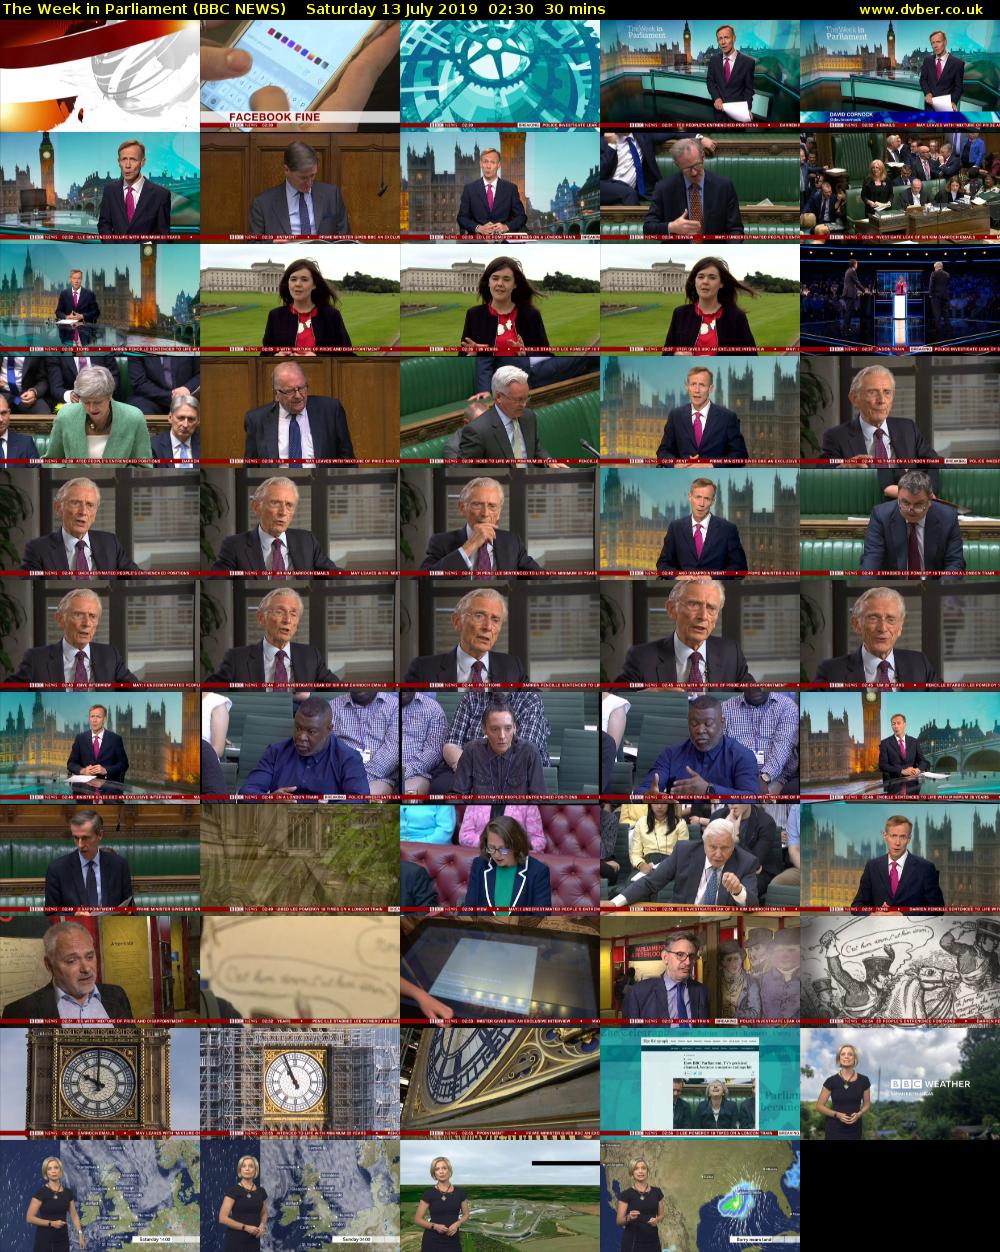 The Week in Parliament (BBC NEWS) Saturday 13 July 2019 02:30 - 03:00